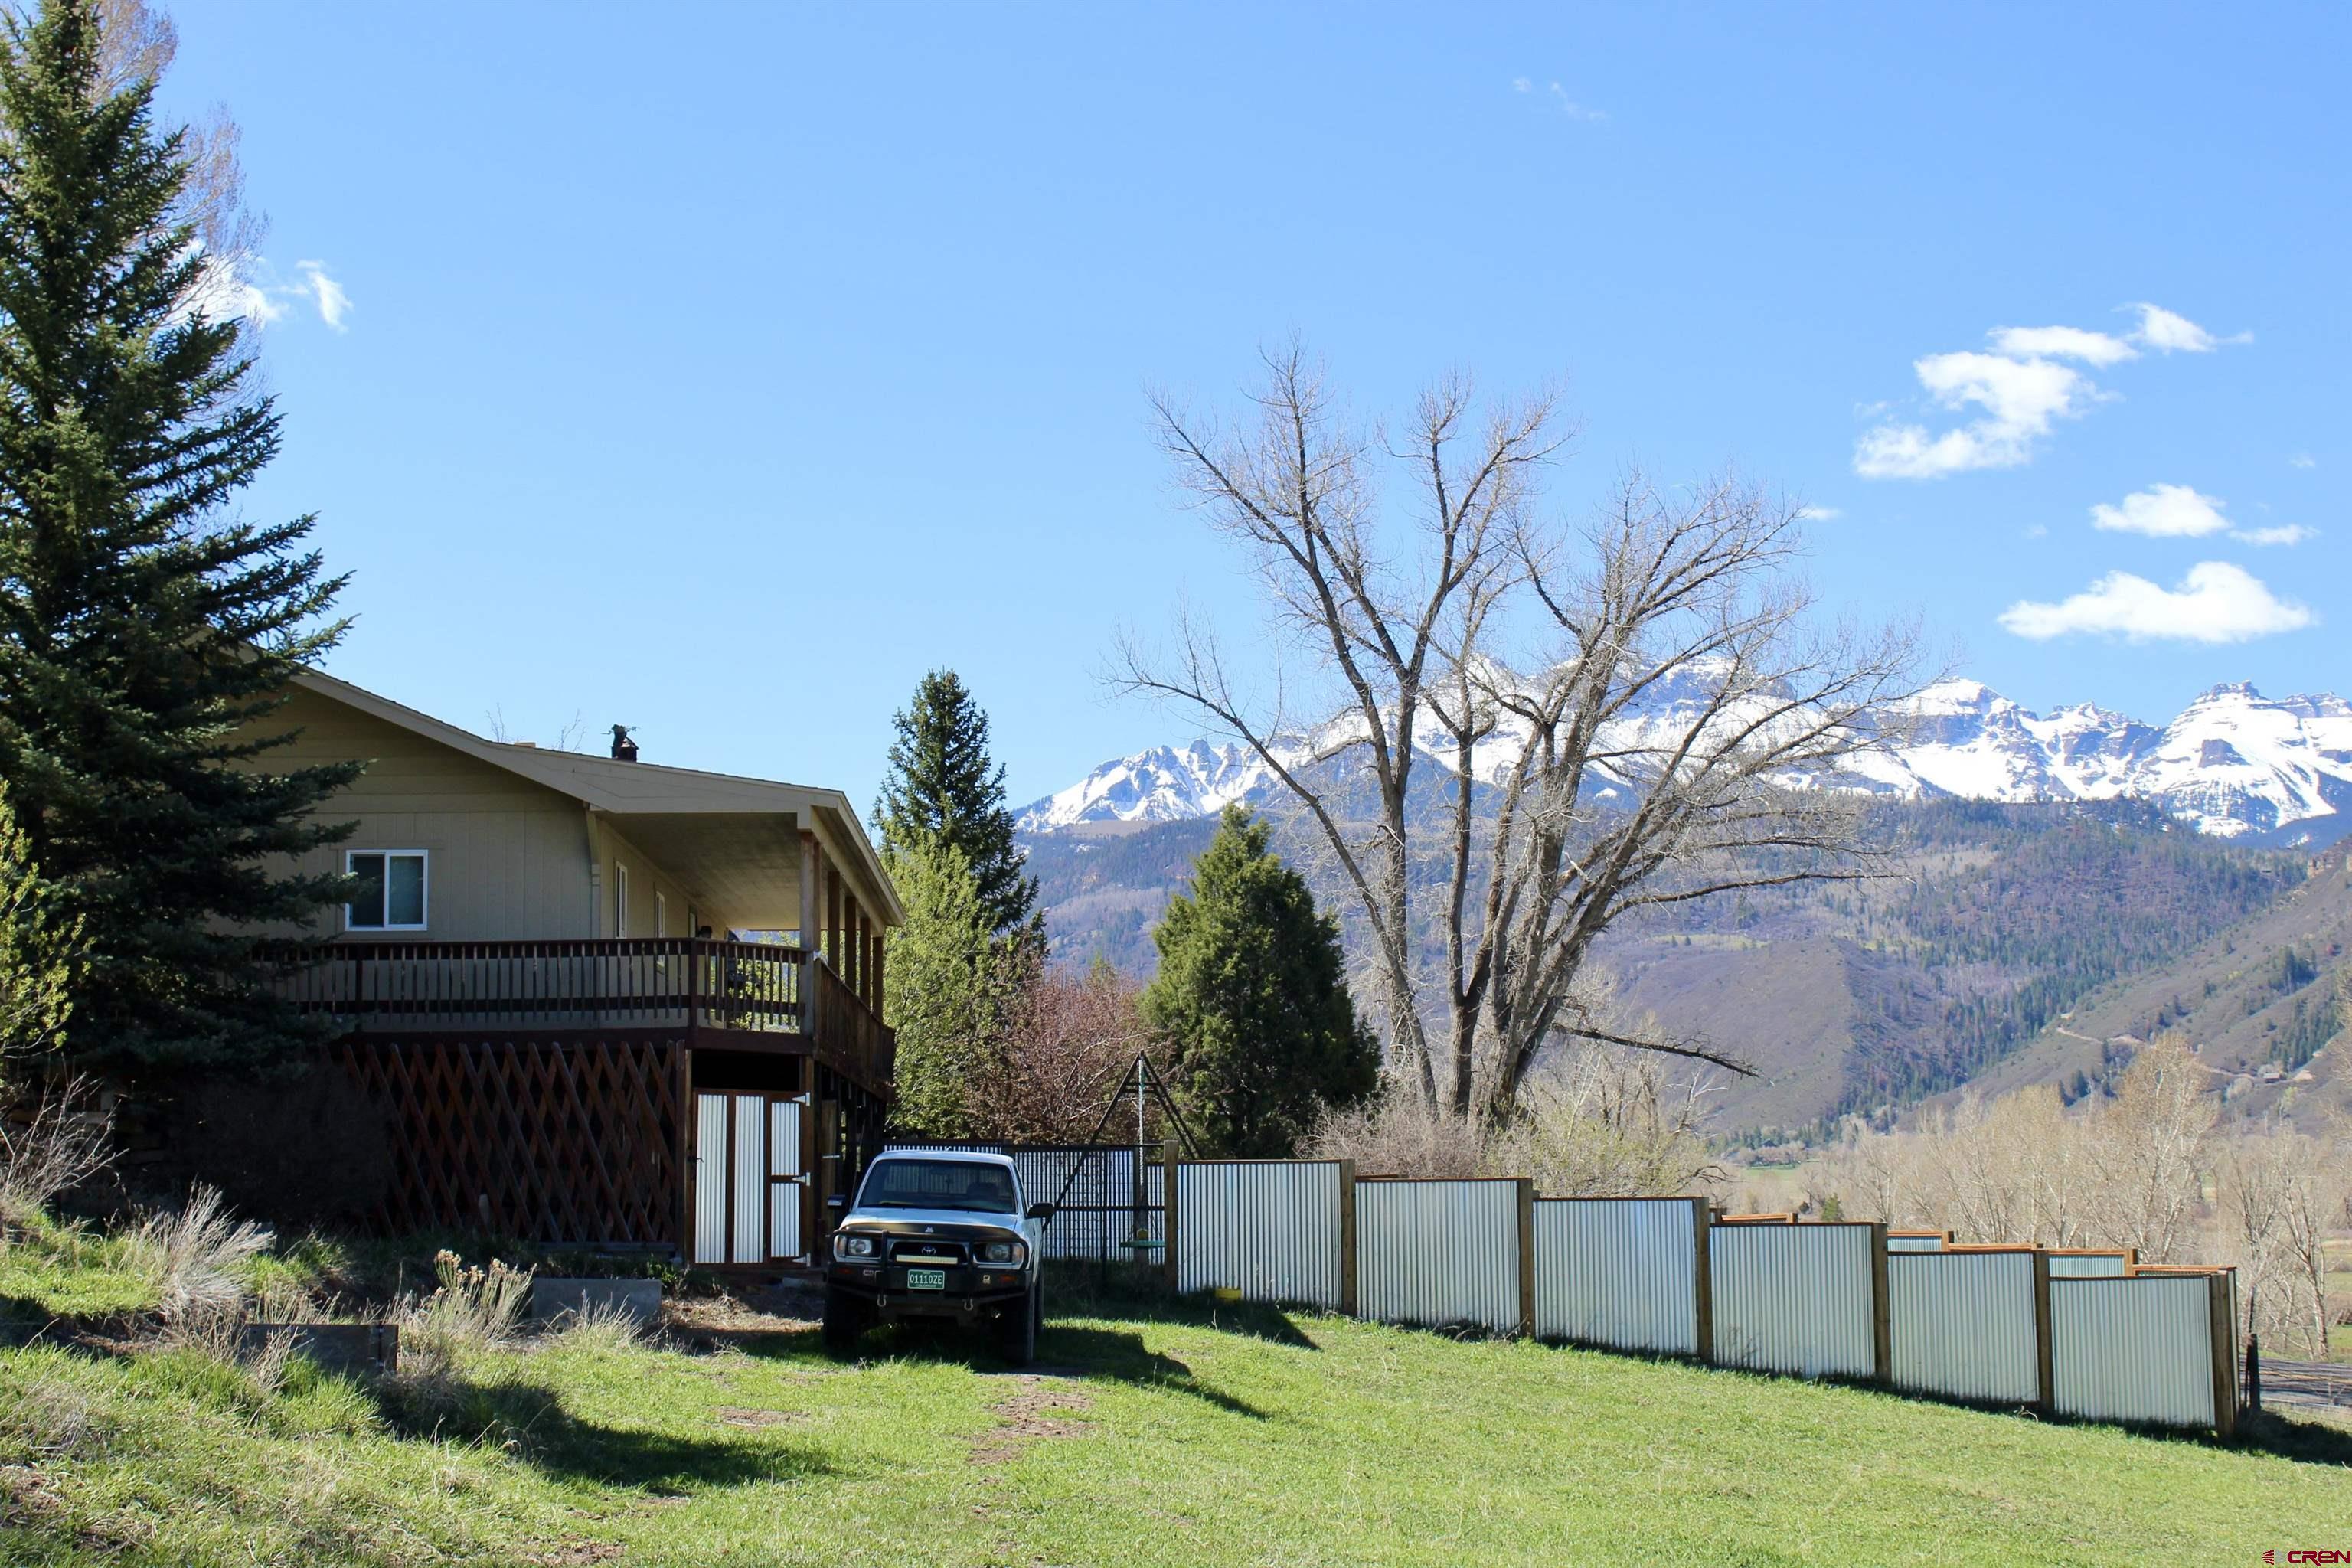 LOCATION! LOCATION! LOCATION! MOUNTAIN VIEWS AT THEIR BEST!  Here is your chance to get a one-of-a-kind property close to Ouray and Ridgway with everything you need.  Located just off 550 and across from Orvis Hot Springs, this 1.85 acres is complete with a 3 bedroom/2 bath home, partially completed basement which already has forced air for heat, detached 3 bay garages with a shop, and a gorgeous, enclosed gazebo with electricity overlooking the Sneffels range. The gazebo could be used as a reading room, observation area, hot tub room, art room or more. The basement can be a 4th bedroom, office, work out area, or anything you dream up. There is also a privacy fenced backyard for your 4-legged friends, children to play, or to enjoy yourself.  With the home sitting up above the highway, the deck has spectacular views of the mountains.  The property has 2 access points and has room for all your toys and a roomy shop for your projects.   Come see all the possibilities.  Empty and easy to show!